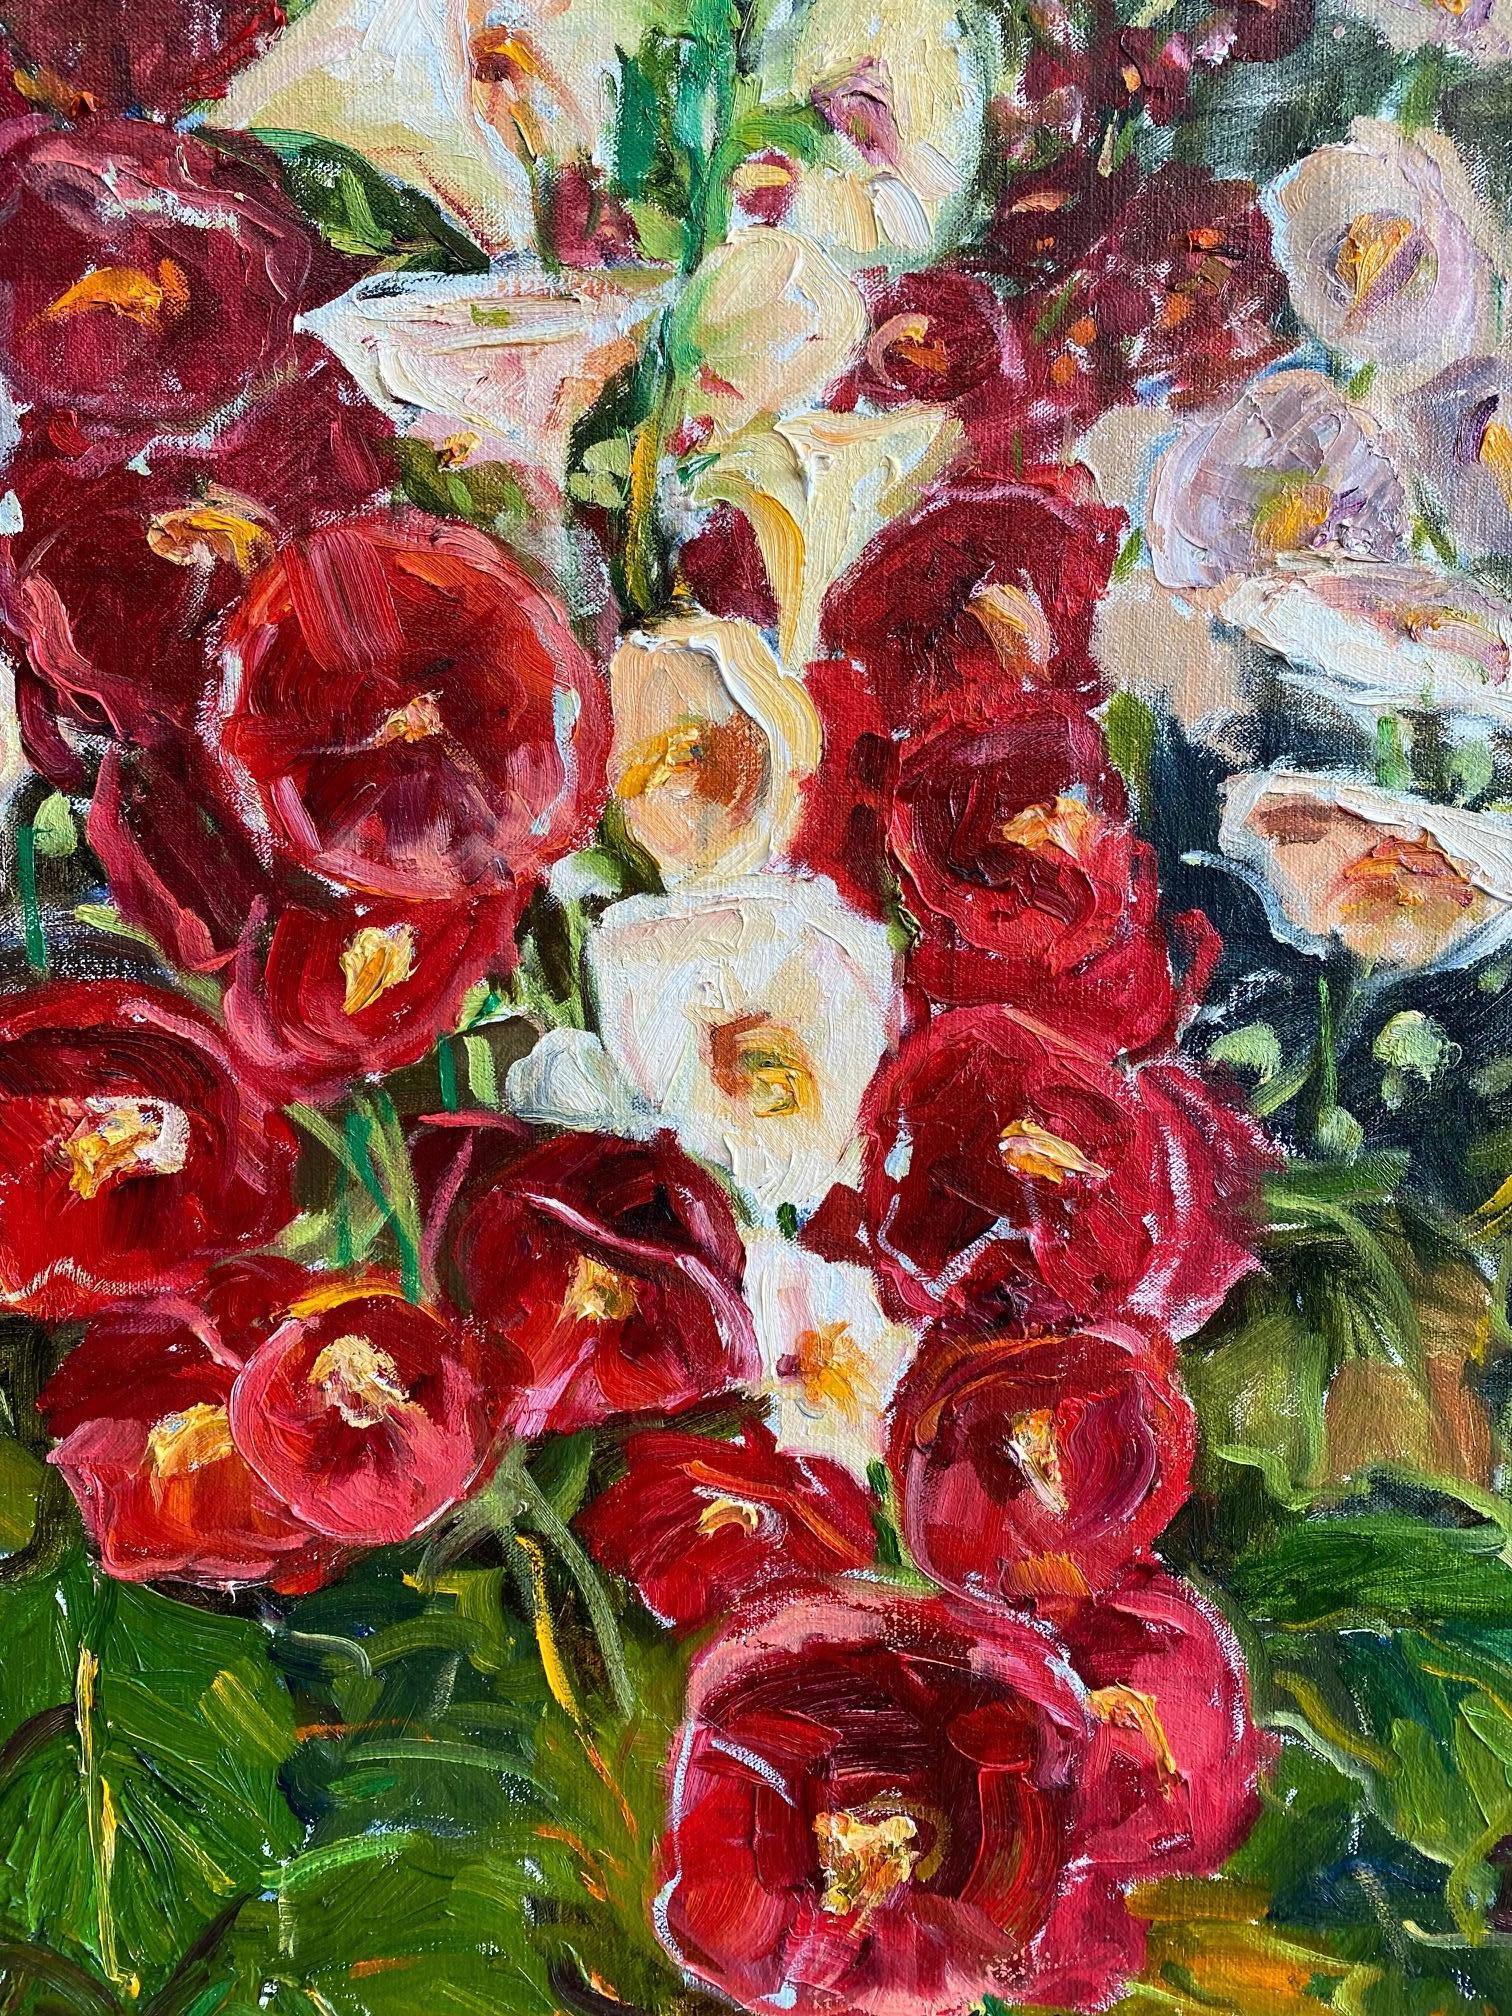 Hollyhocks in Full Bloom, paysage floral expressionniste original 30x24 - Painting de Doreen Tighe